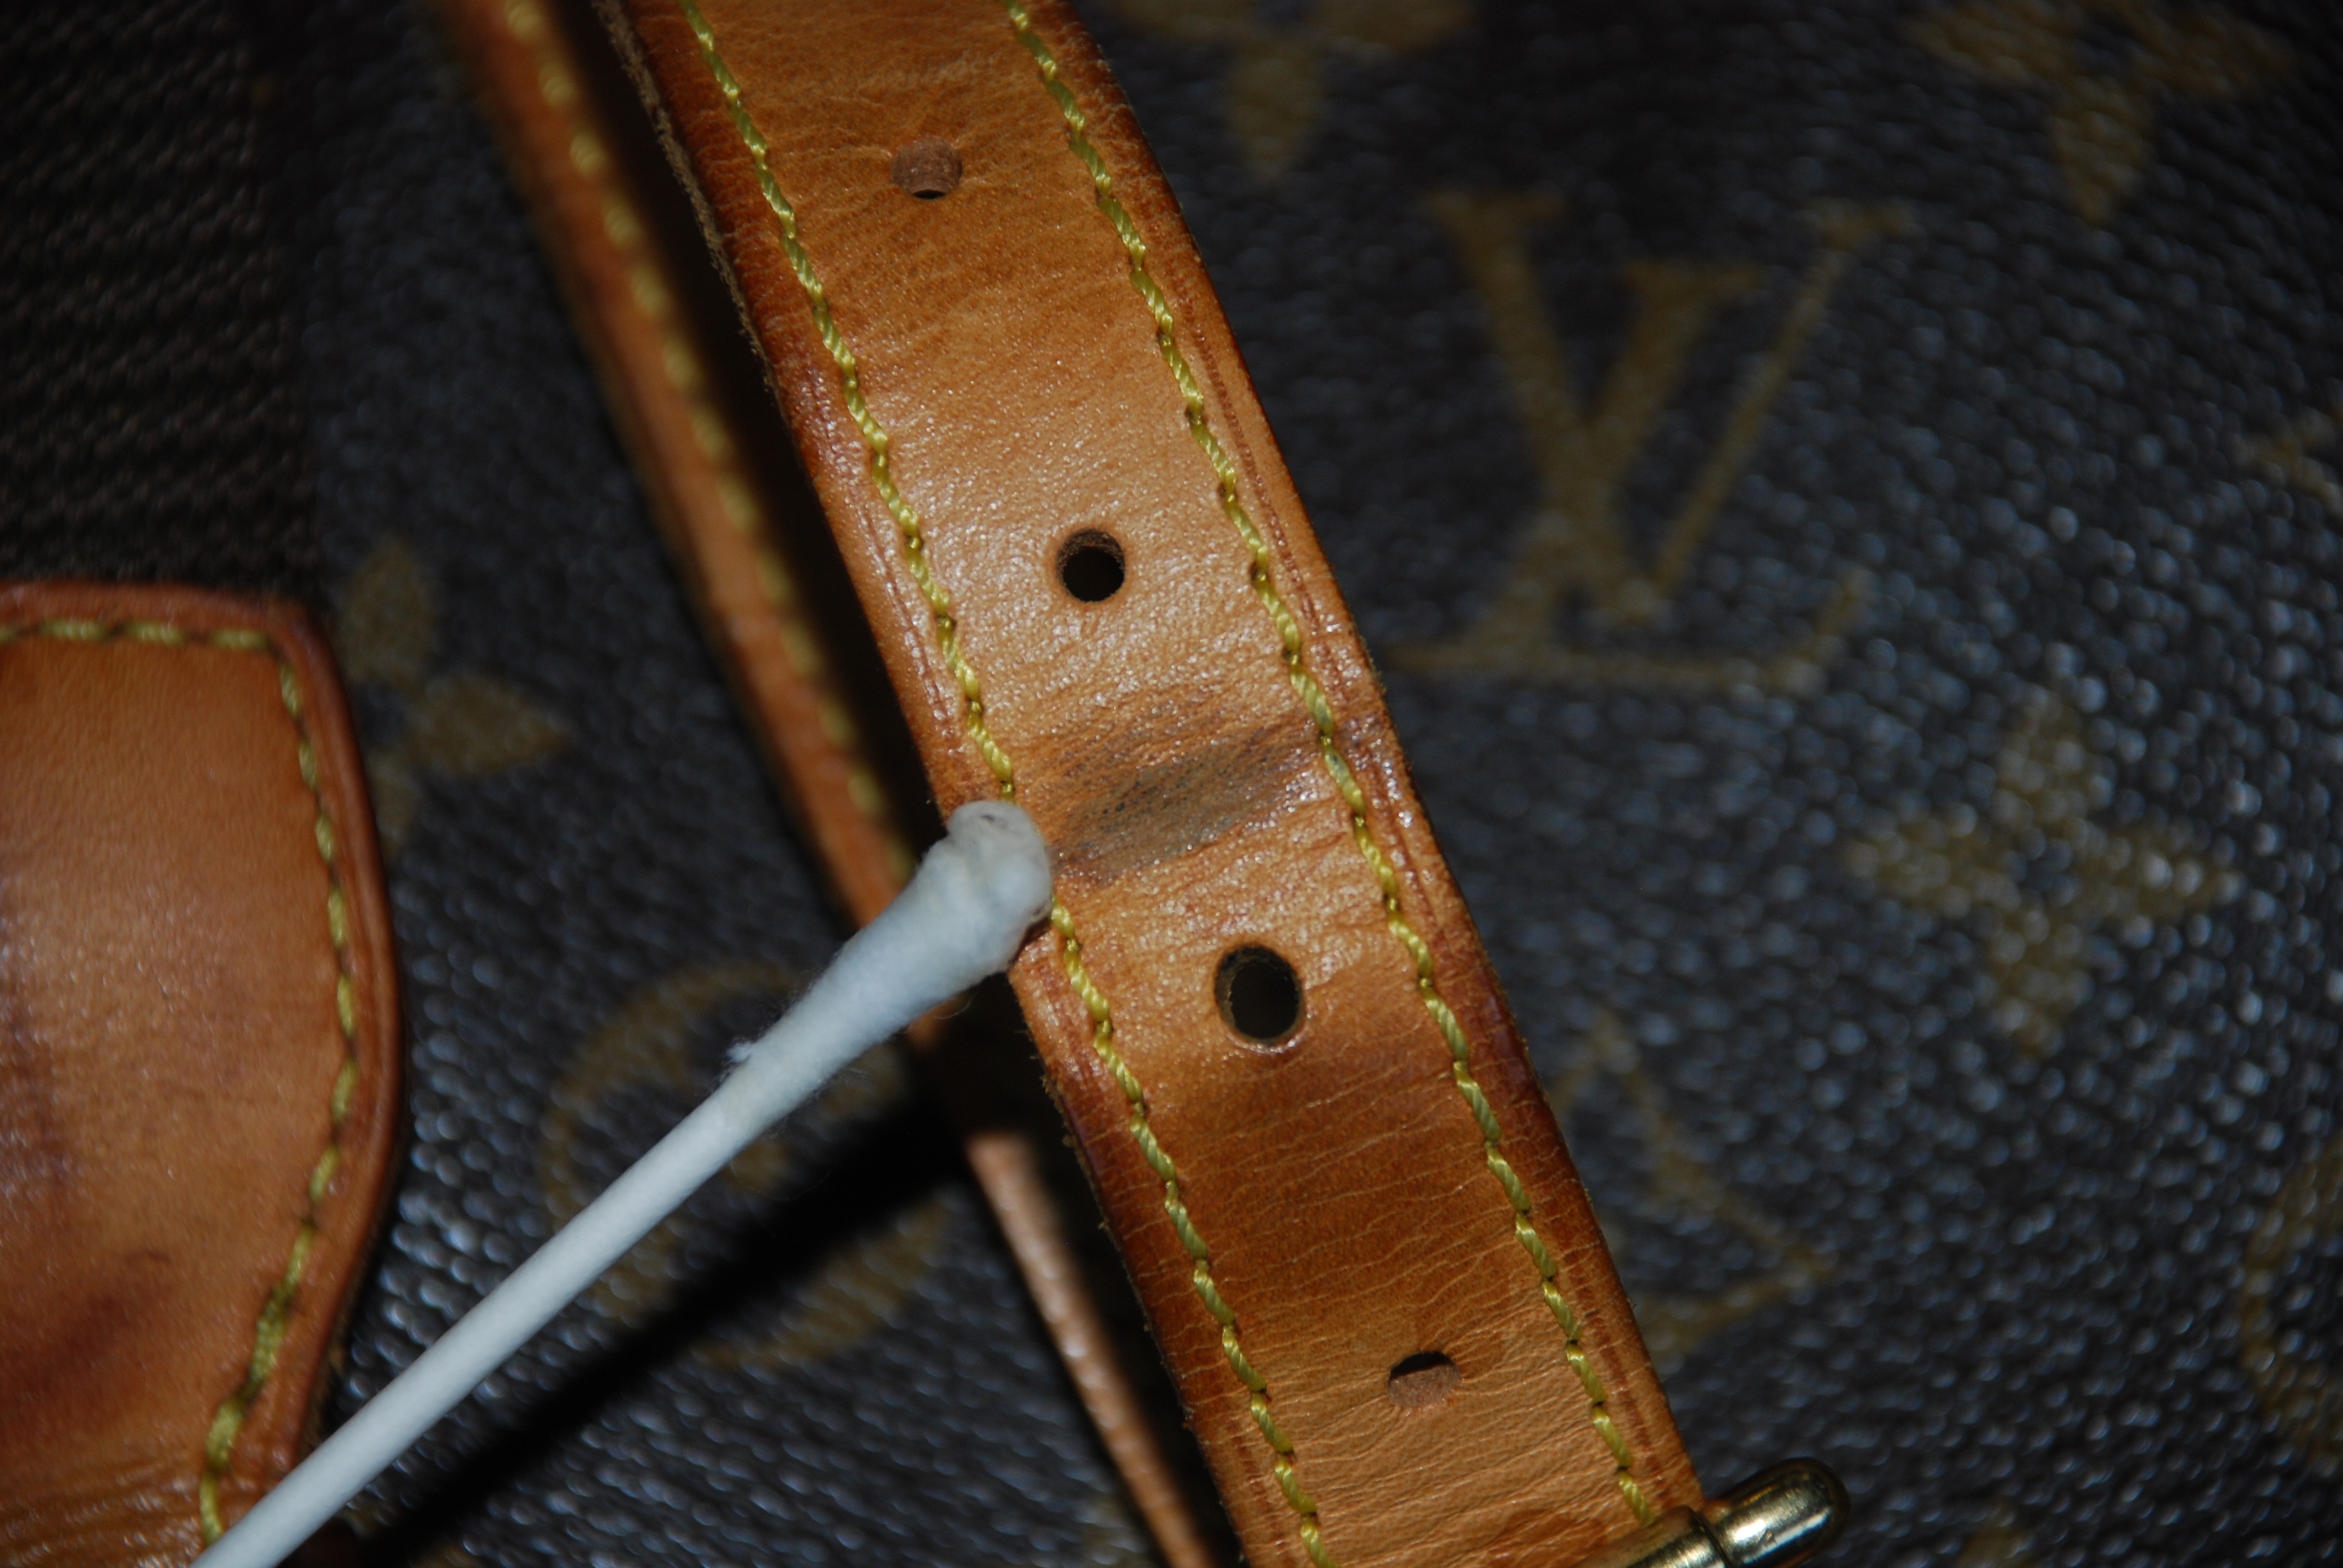 Repairing & Cleaning Louis Vuitton Canvas/ Vachetta Leather // Daisy dhey 